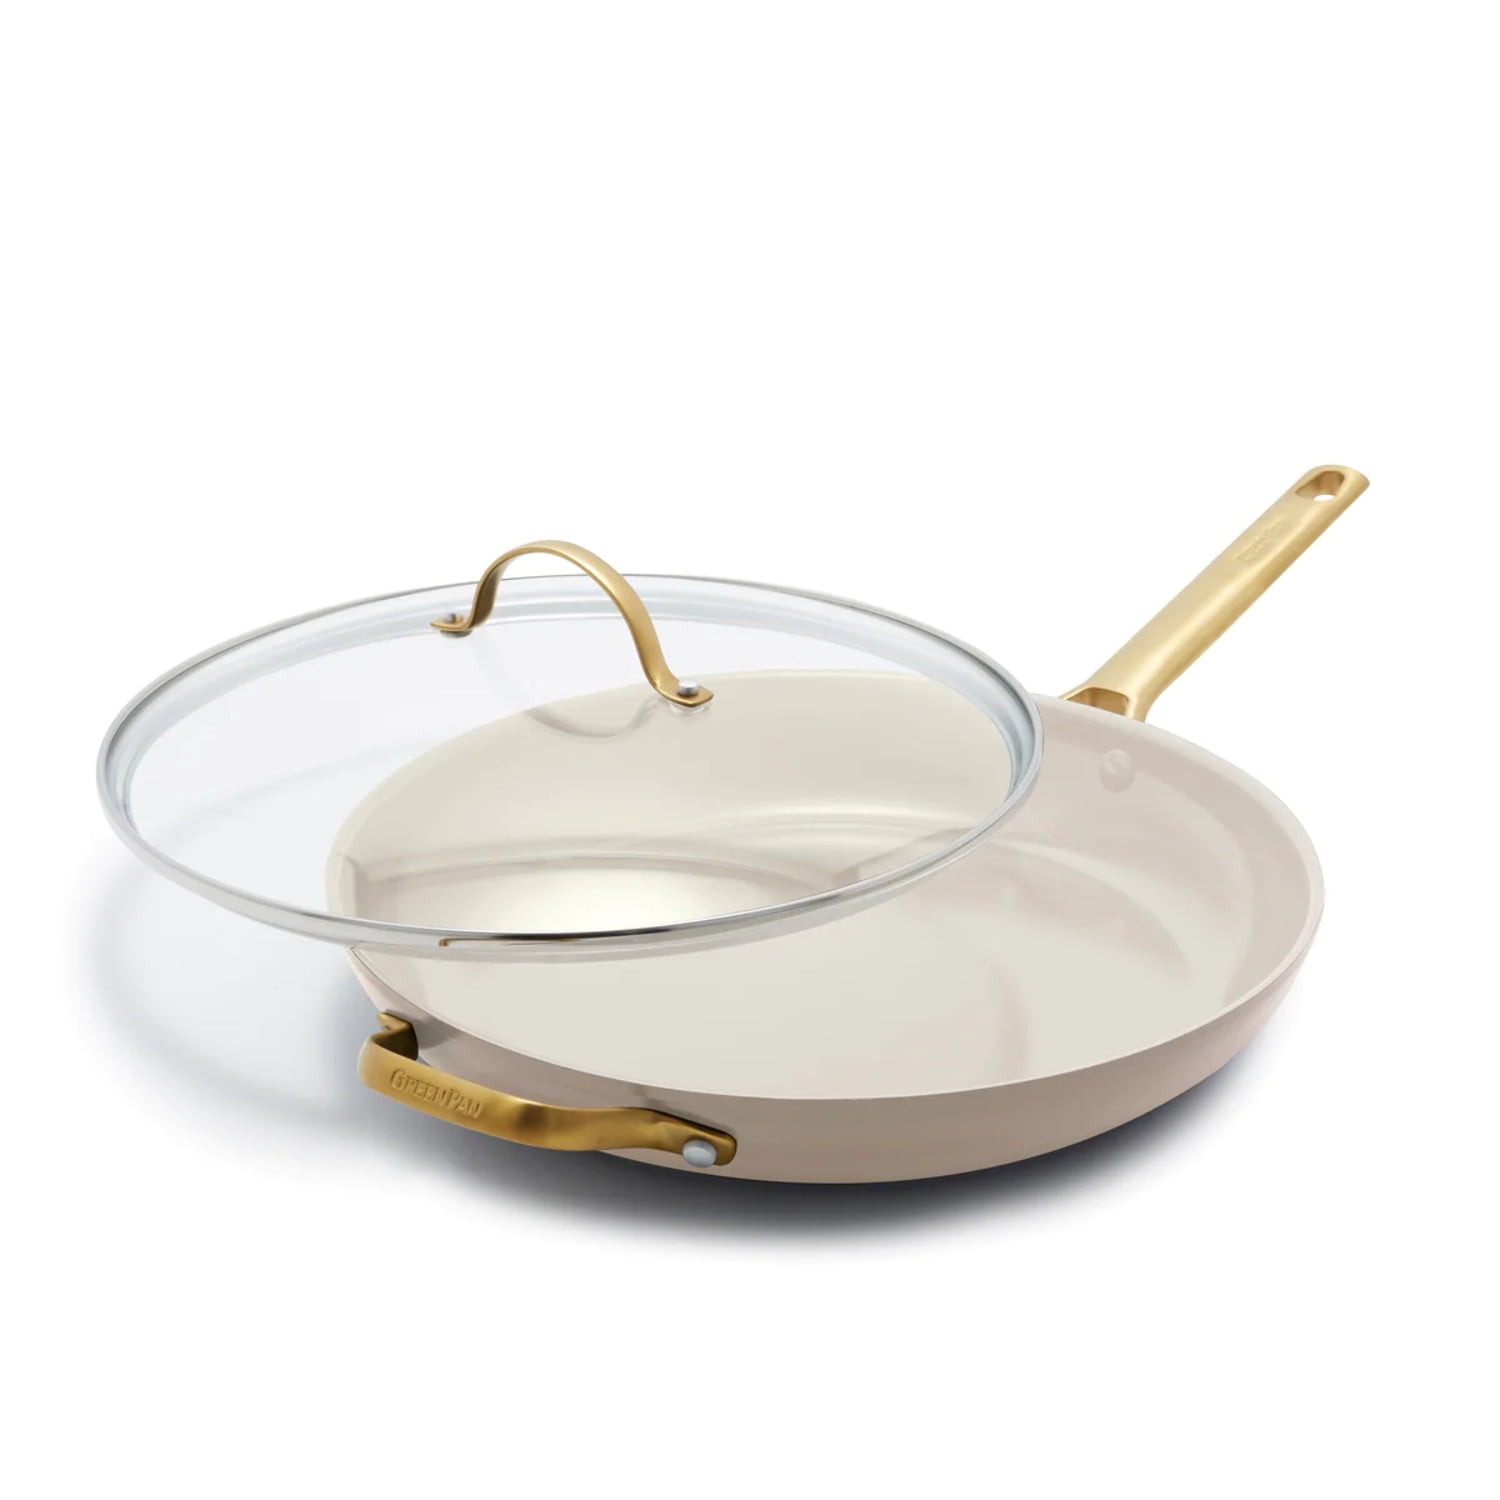 Reserve Ceramic Nonstick 8, 10 and 12 Frypan Set, Taupe with Gold